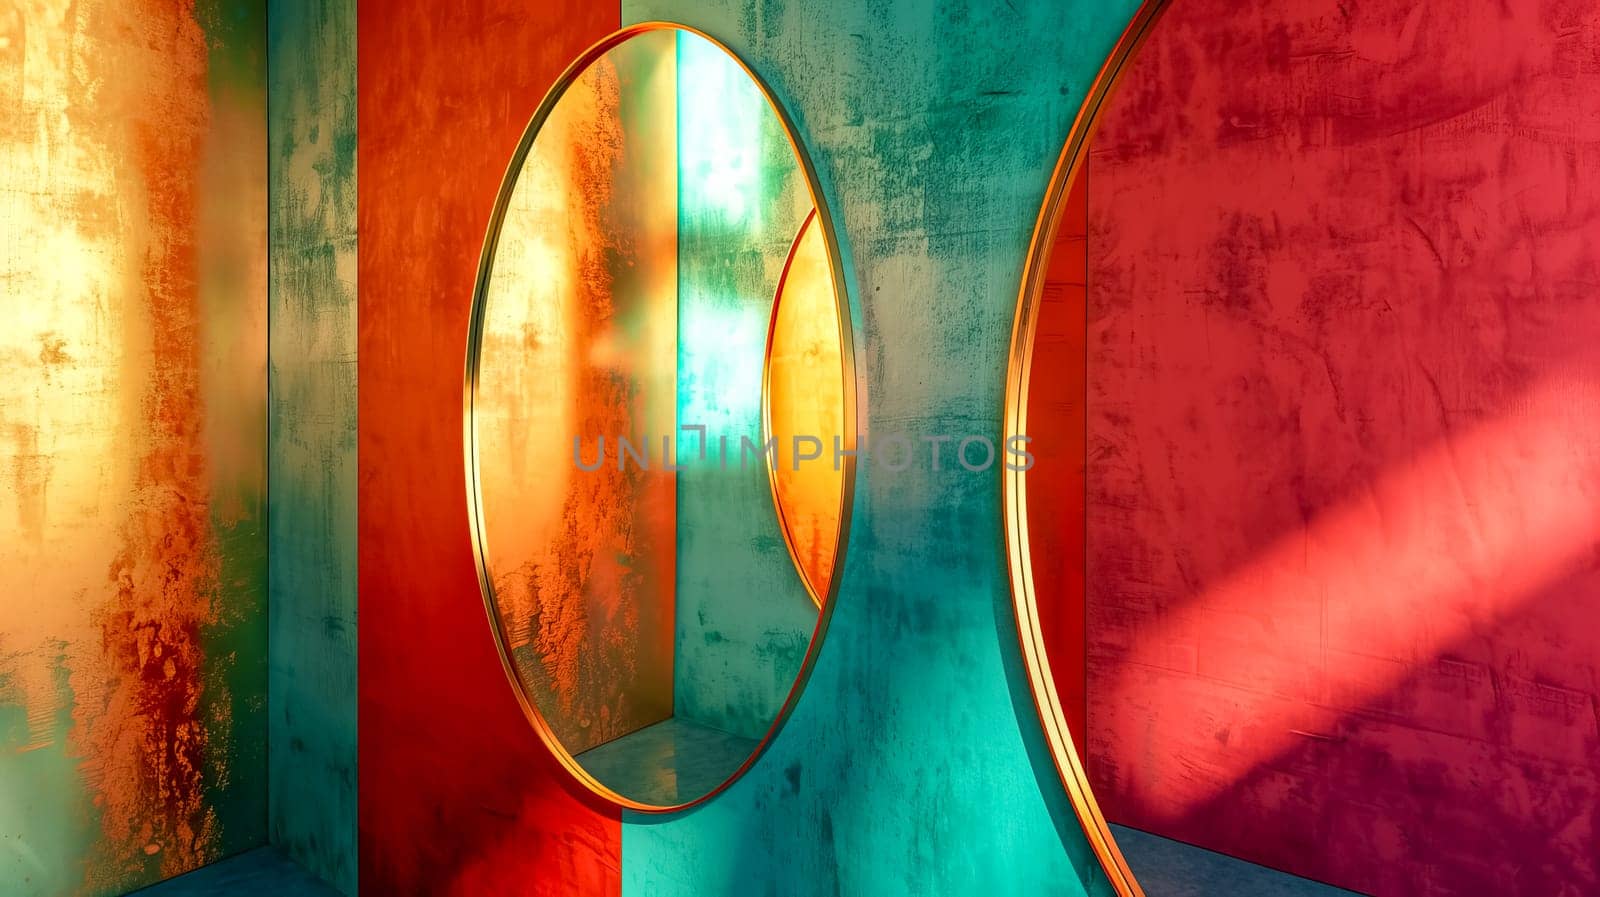 Vibrant interplay of light and shadows on textured walls with circular frames